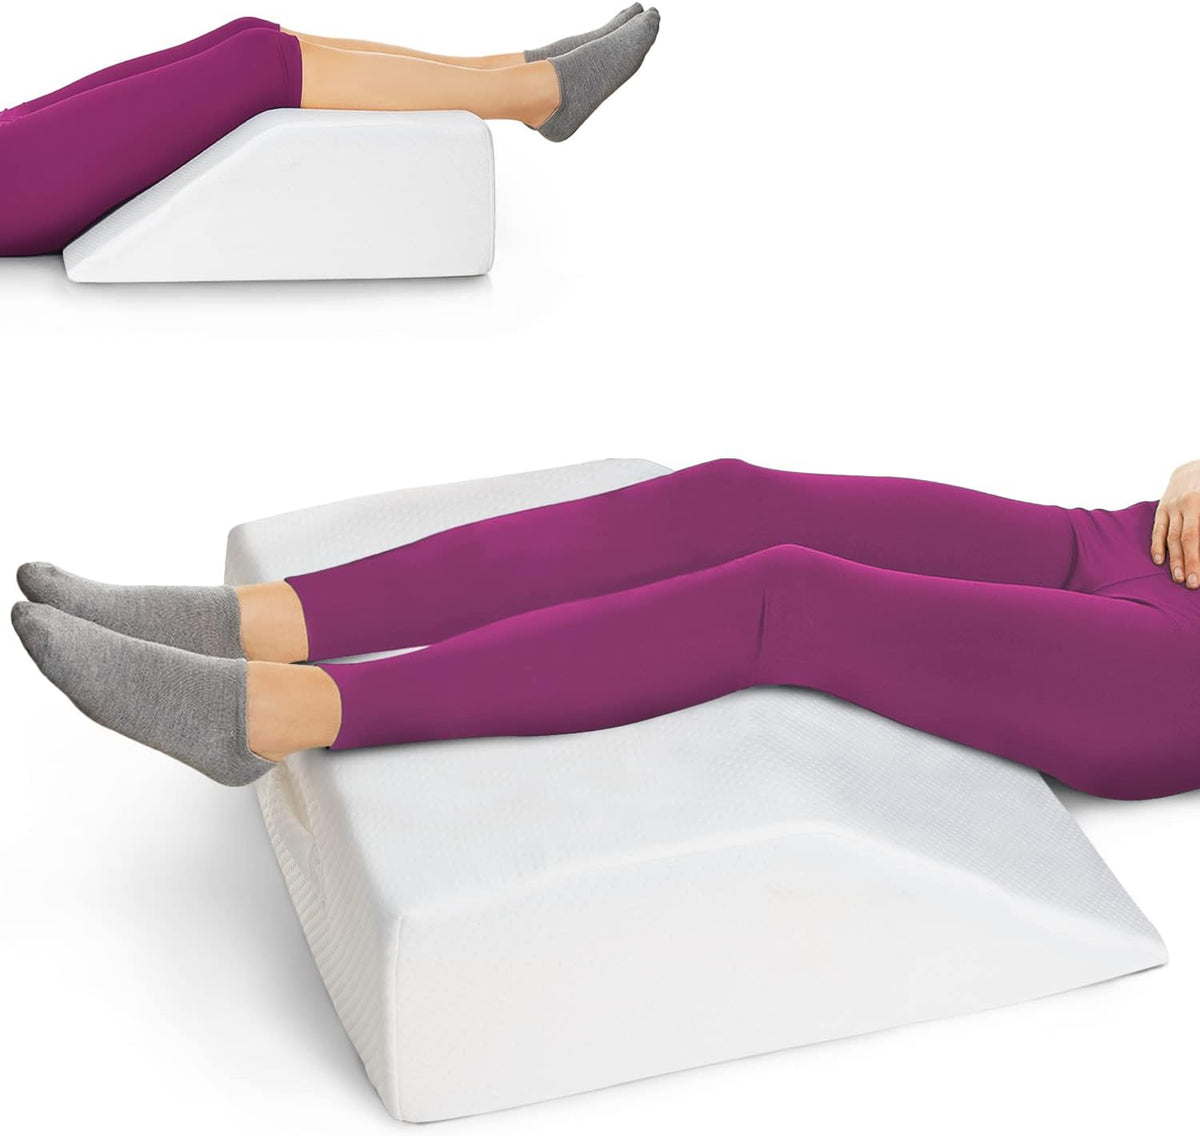 Top 4) Best Leg Elevation Pillows for Recovery and Relief